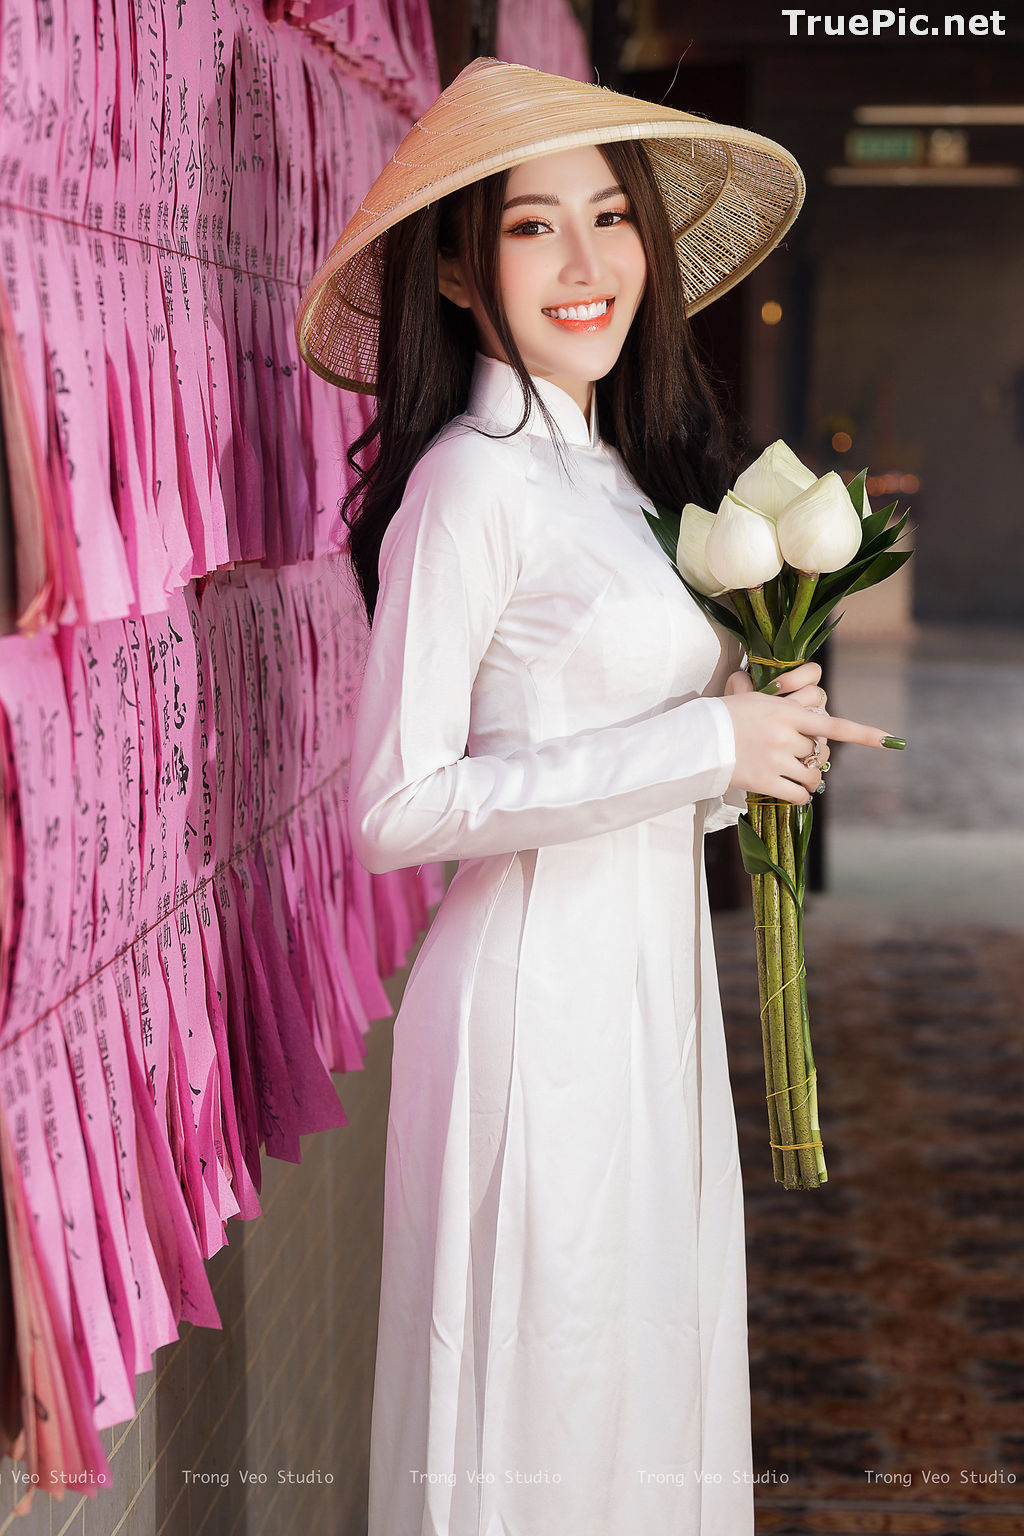 Image The Beauty of Vietnamese Girls with Traditional Dress (Ao Dai) #2 - TruePic.net - Picture-32